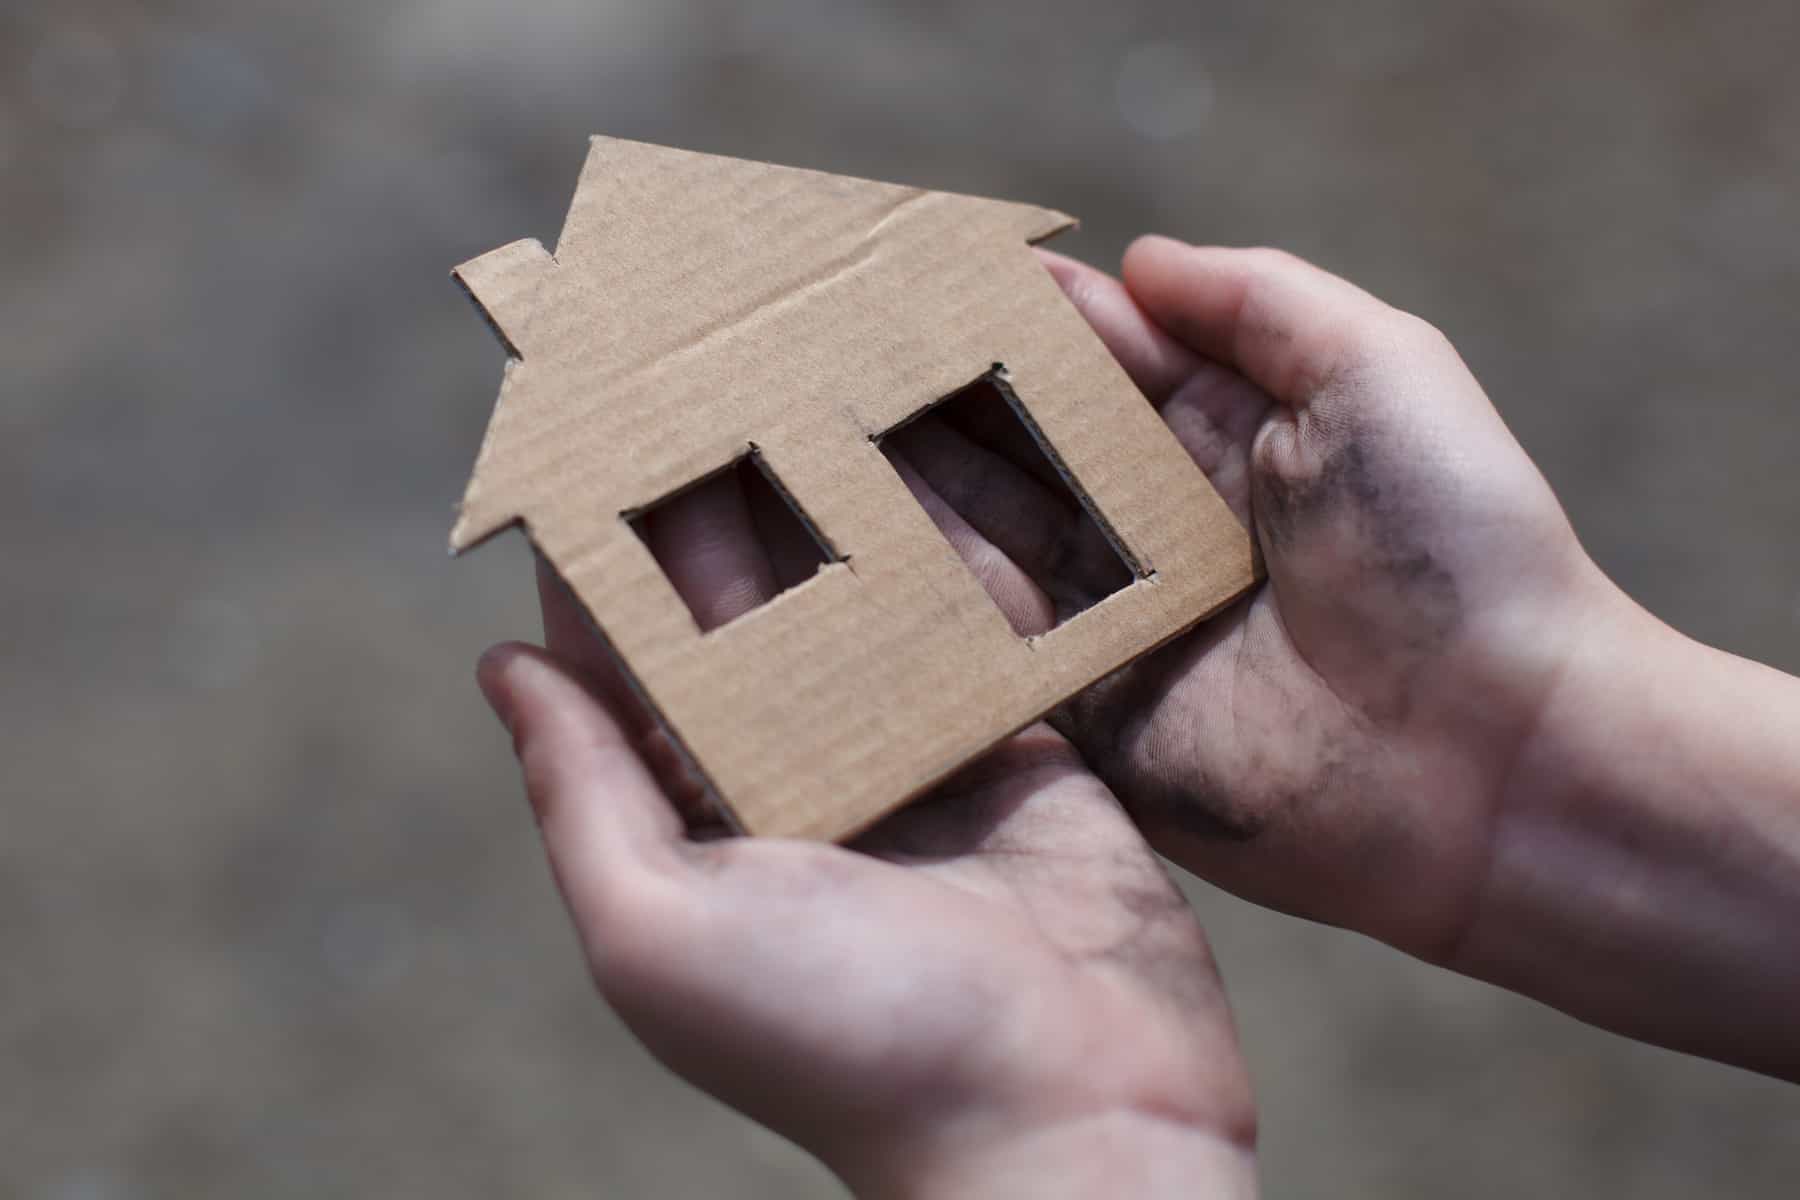 A pair of hands holding a cardboard cutout of a house